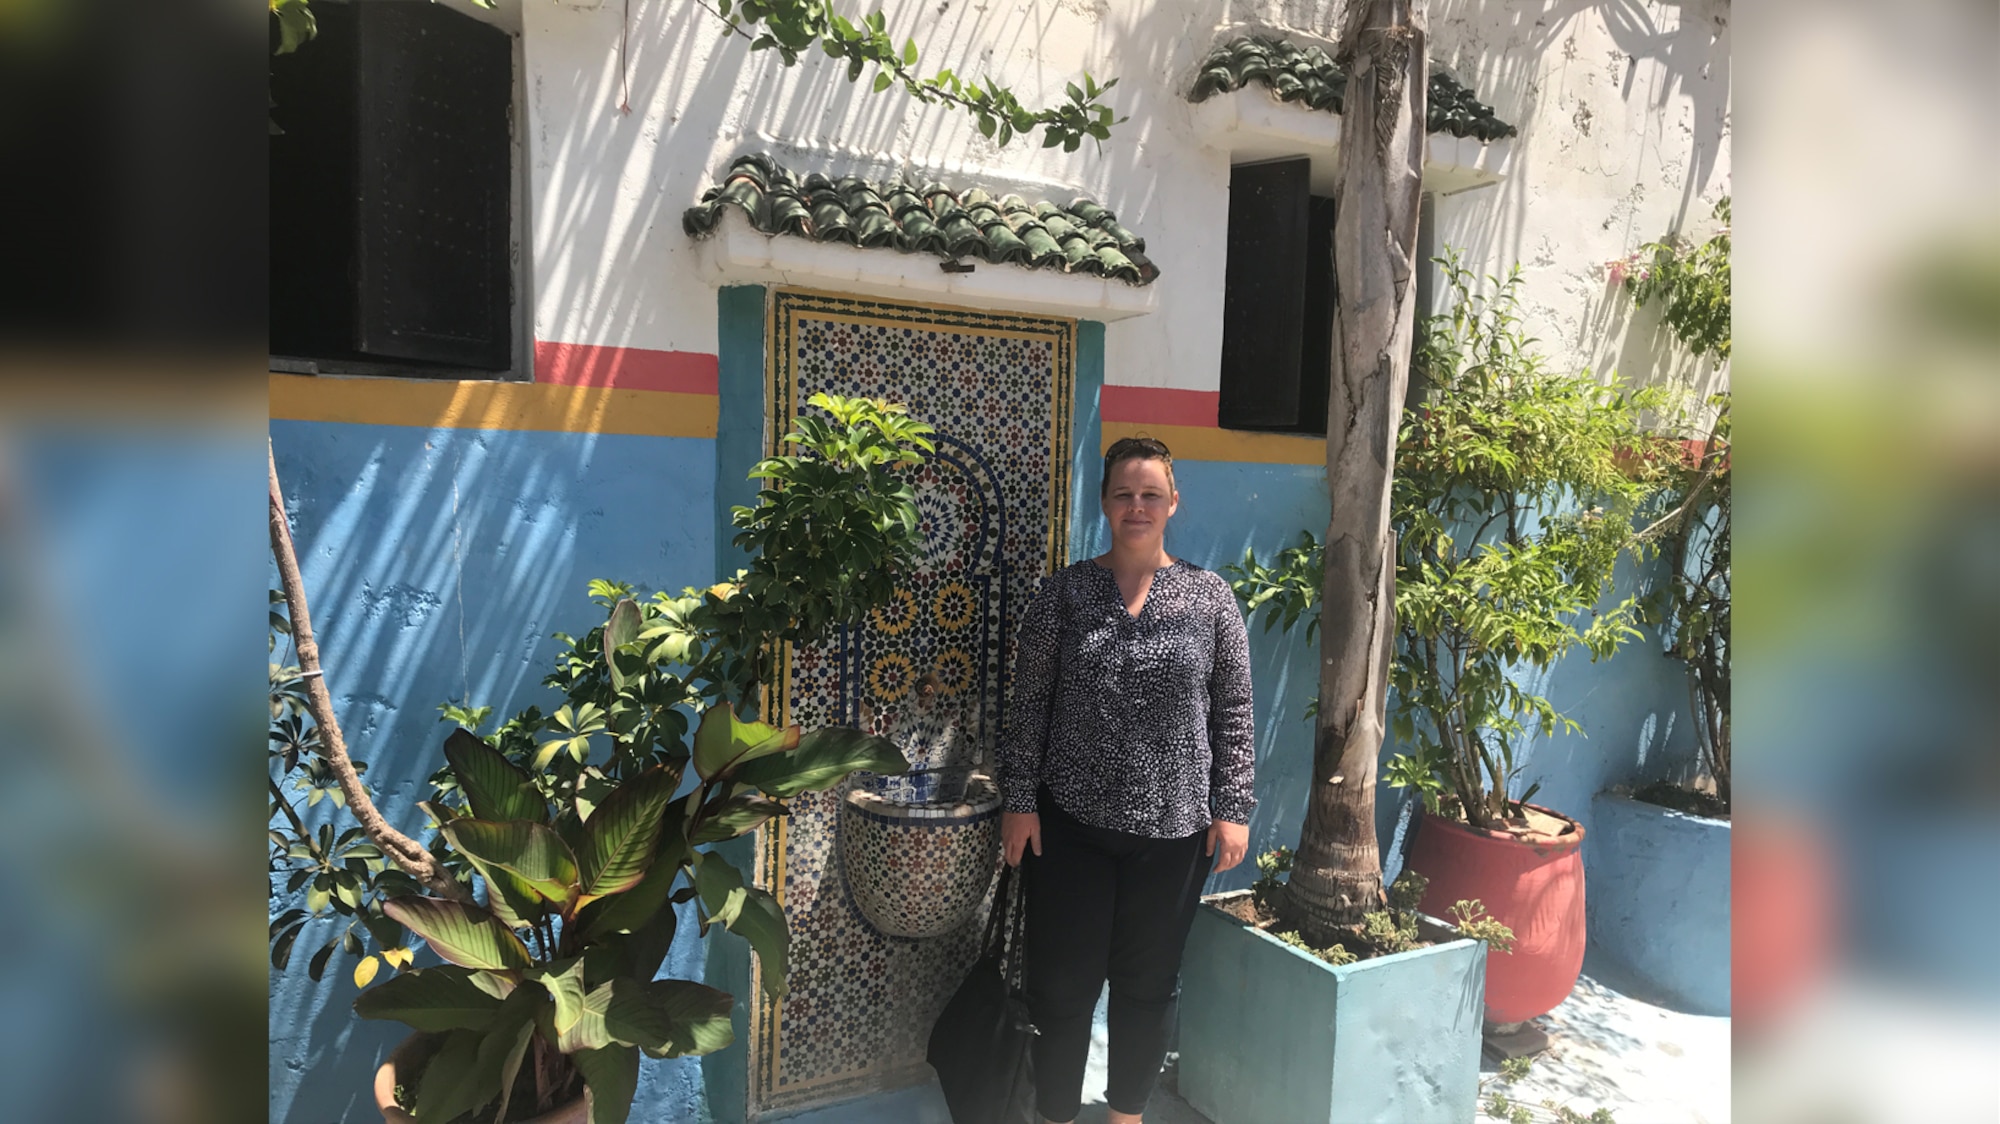 Photo taken in the old city of Rabat, Morocco, in the summer of 2018. Courtesy of Dr. Kristin Hissong.